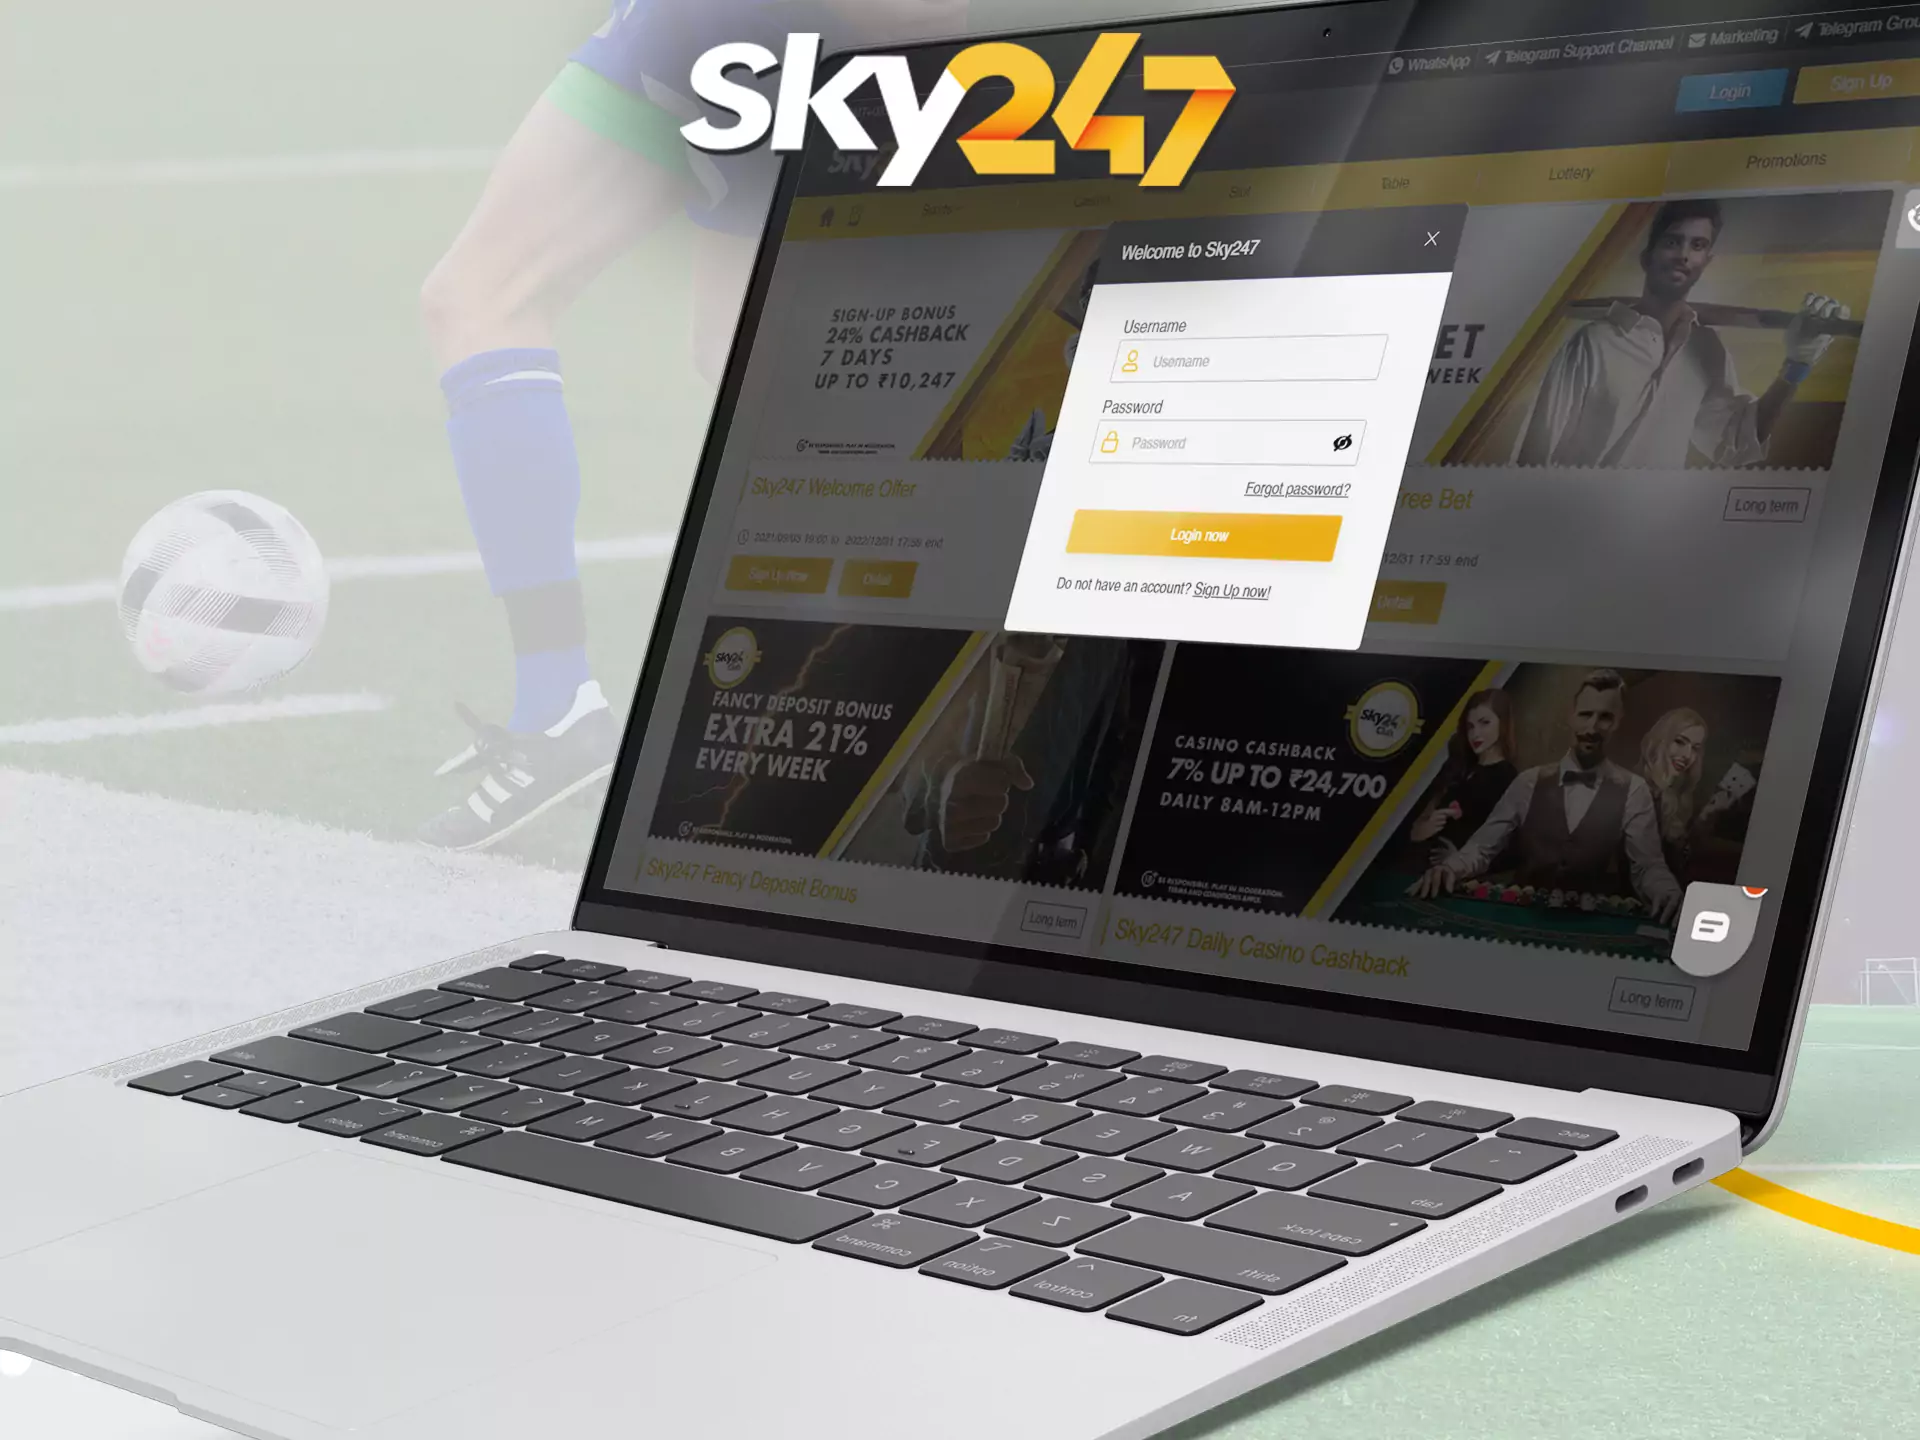 To start betting on Sky247, log into your account.